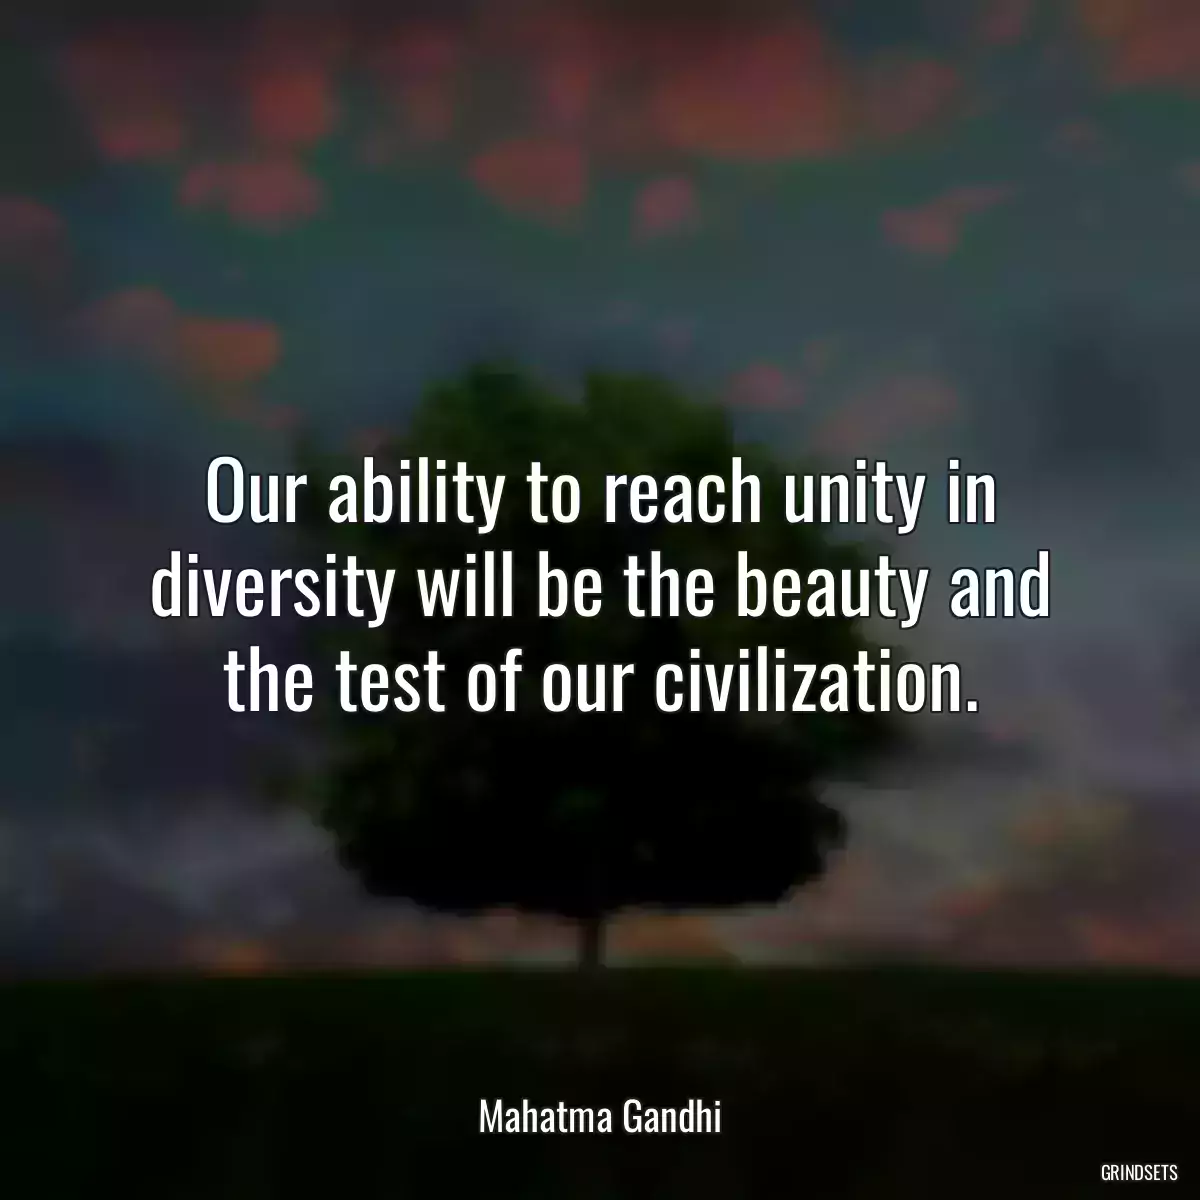 Our ability to reach unity in diversity will be the beauty and the test of our civilization.